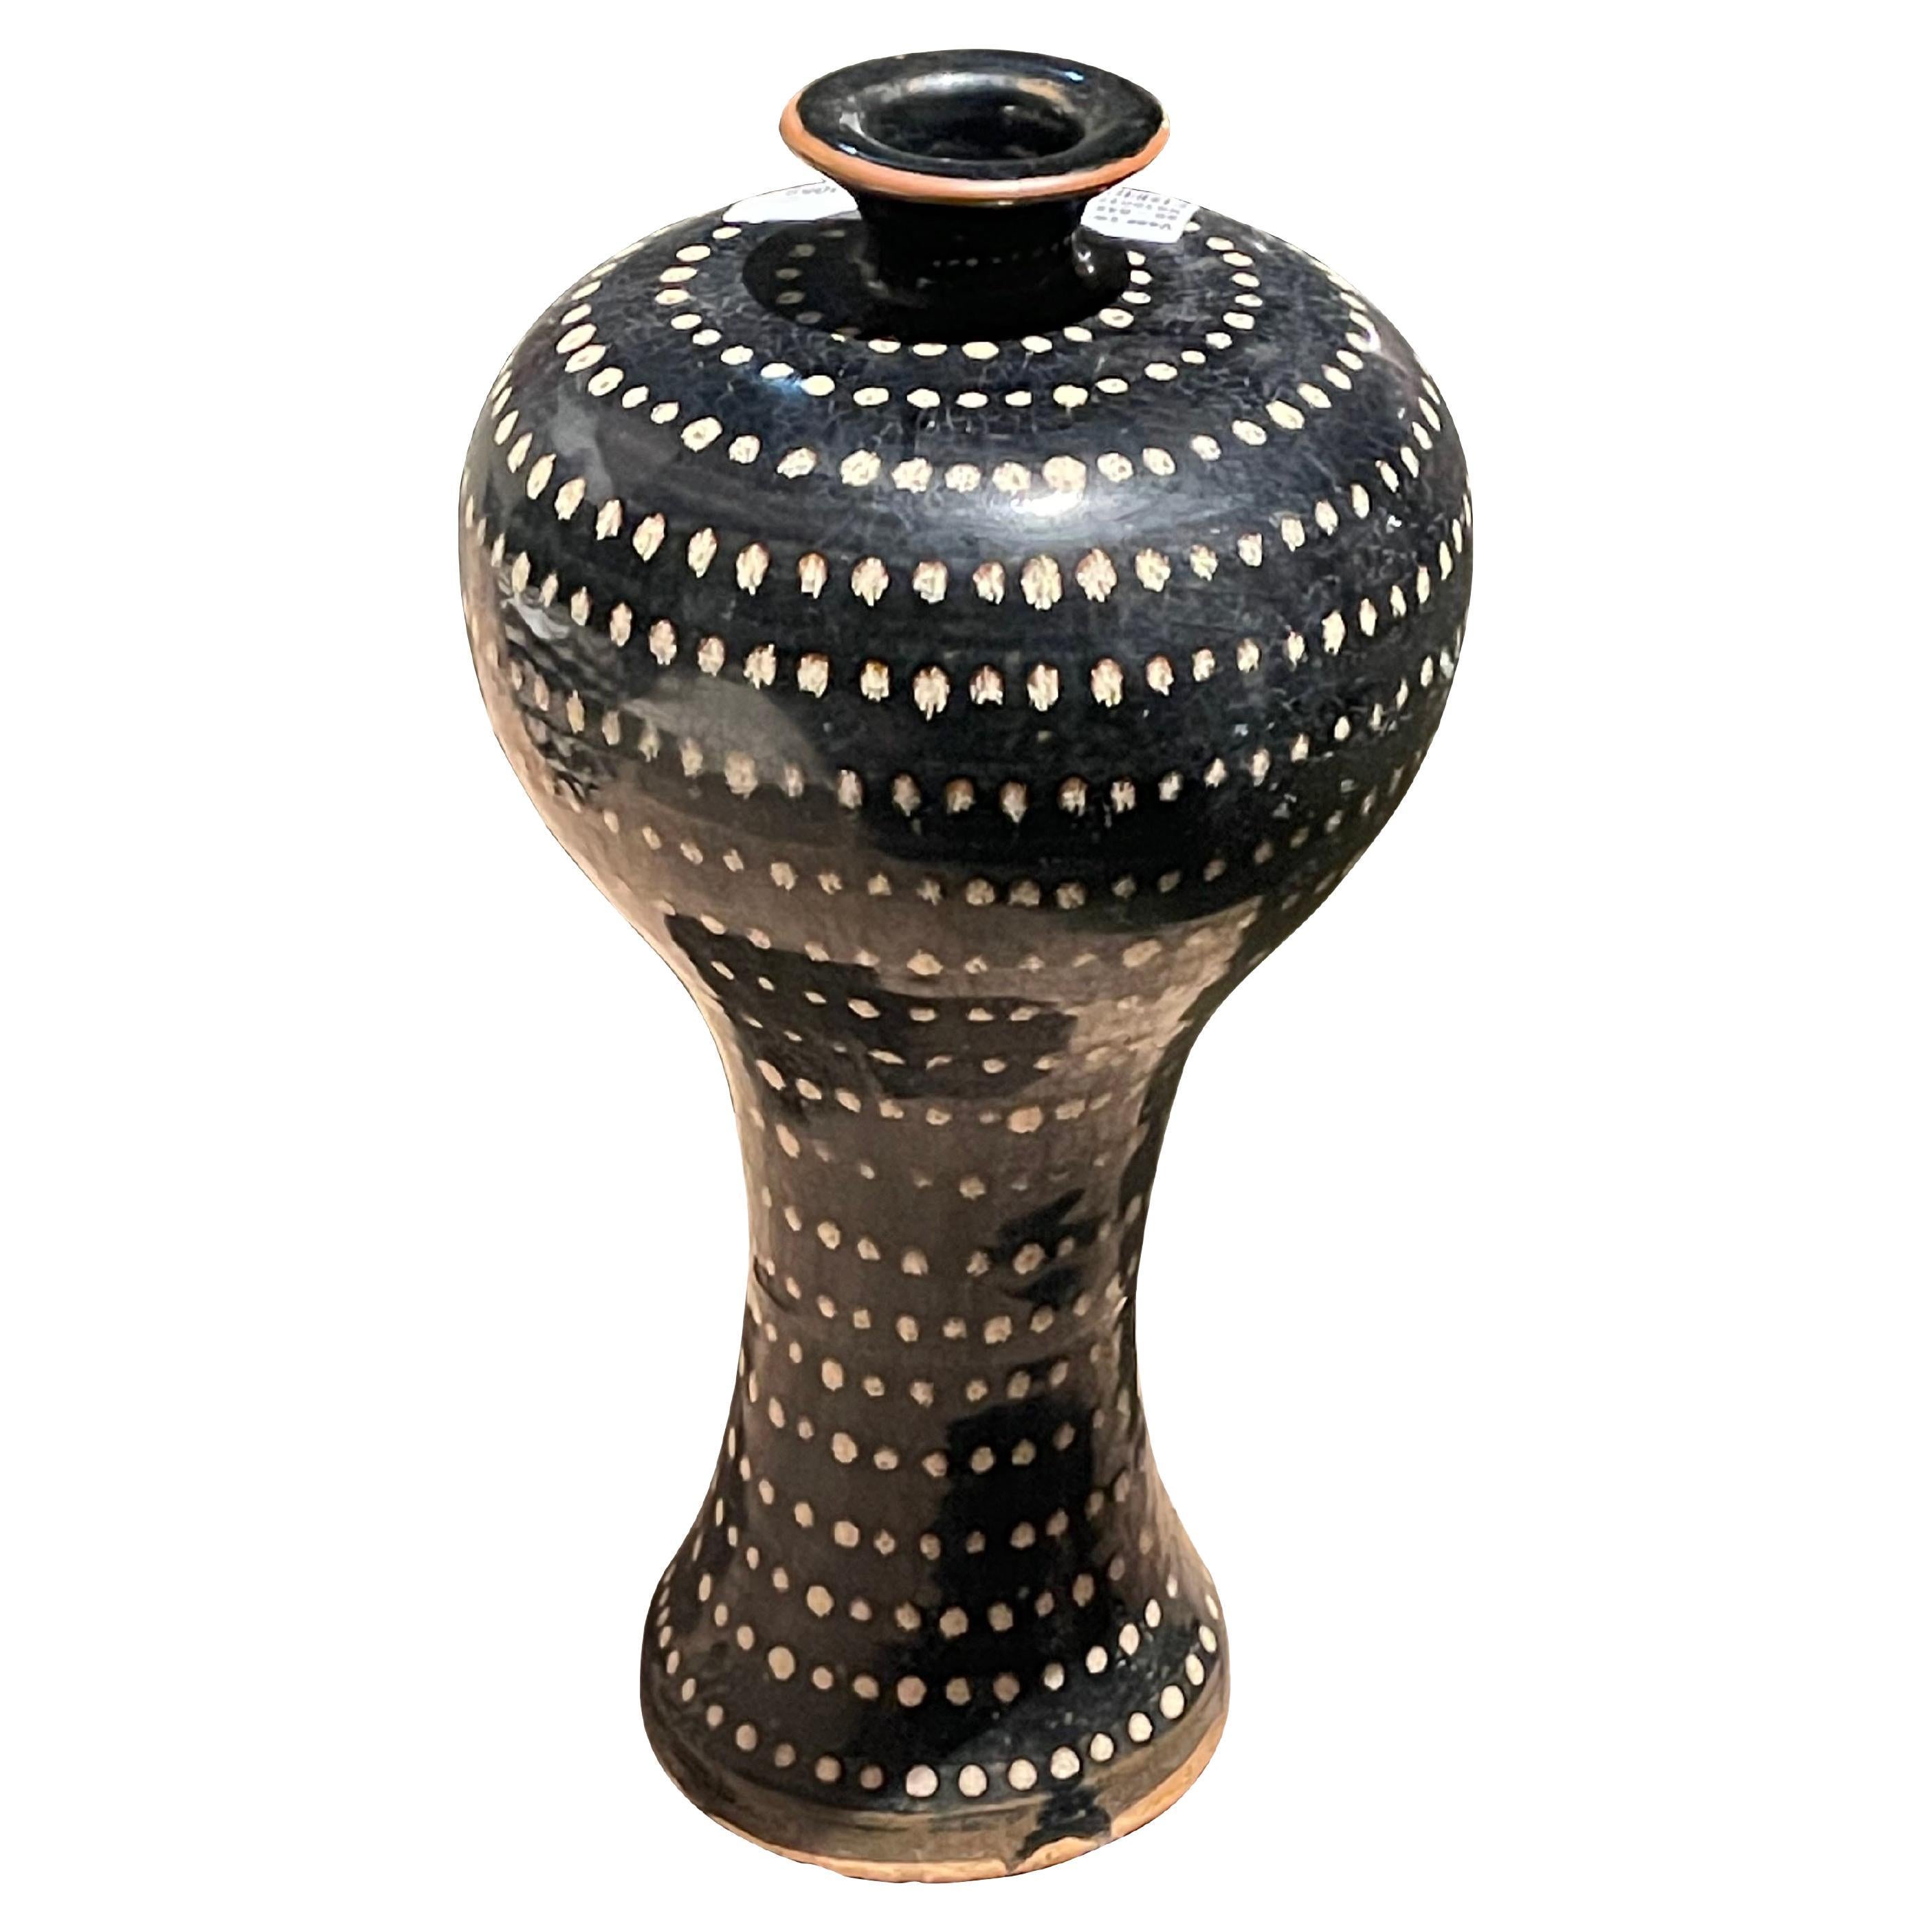 Contemporary Chinese black ground vase with hand painted small white dots.
Curved top shape.
